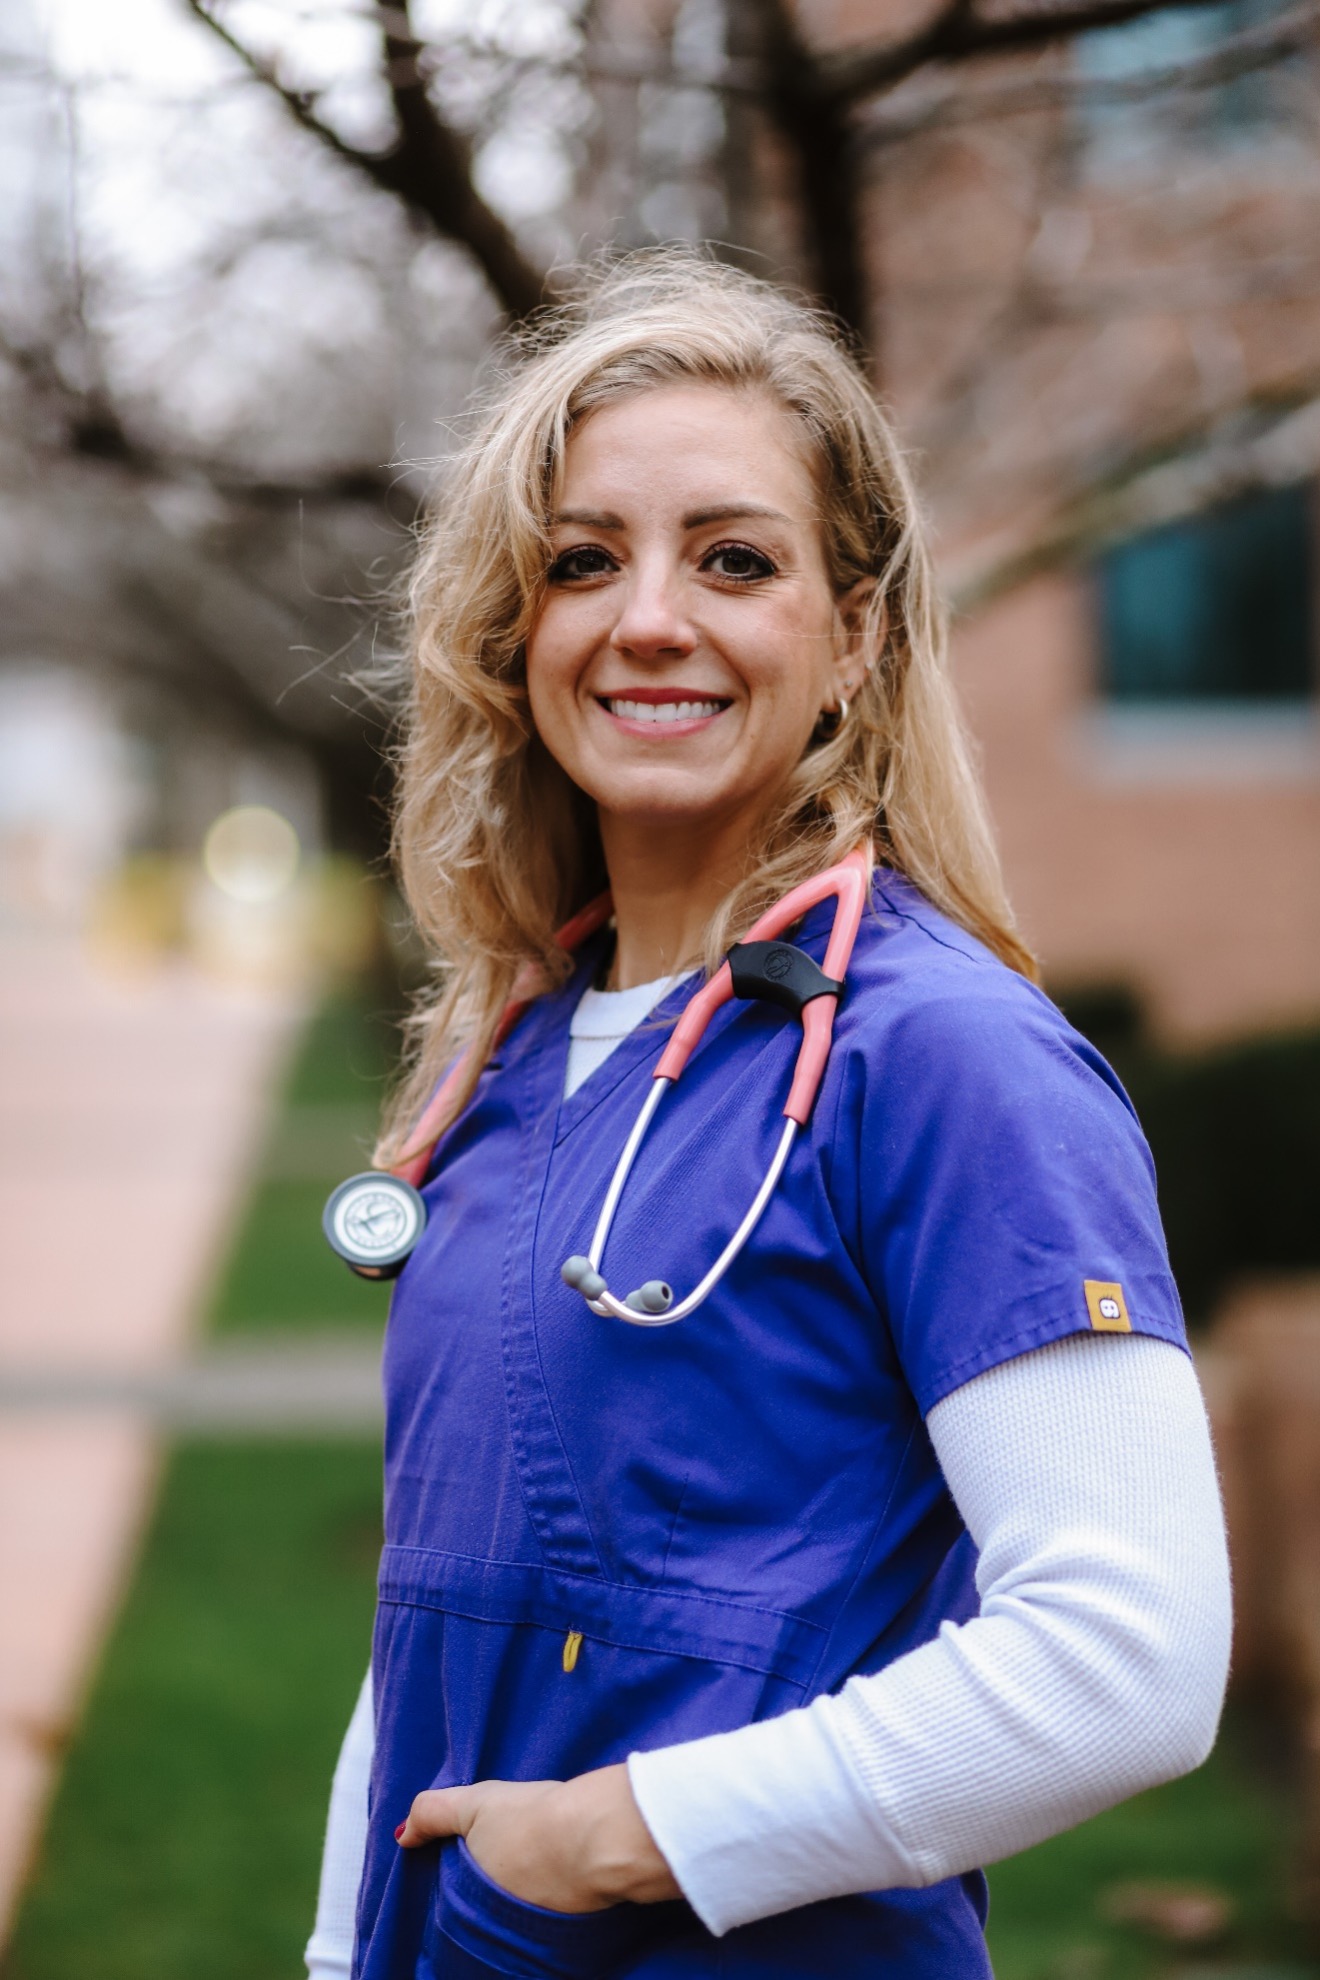 ONS member Whitney Farowich, RN, BSN, BBA, BMTCN®, CLNC, oncology sales specialist at Janssen Biotech, Inc., in Seattle, WA, and member of the Puget Sound ONS Chapter